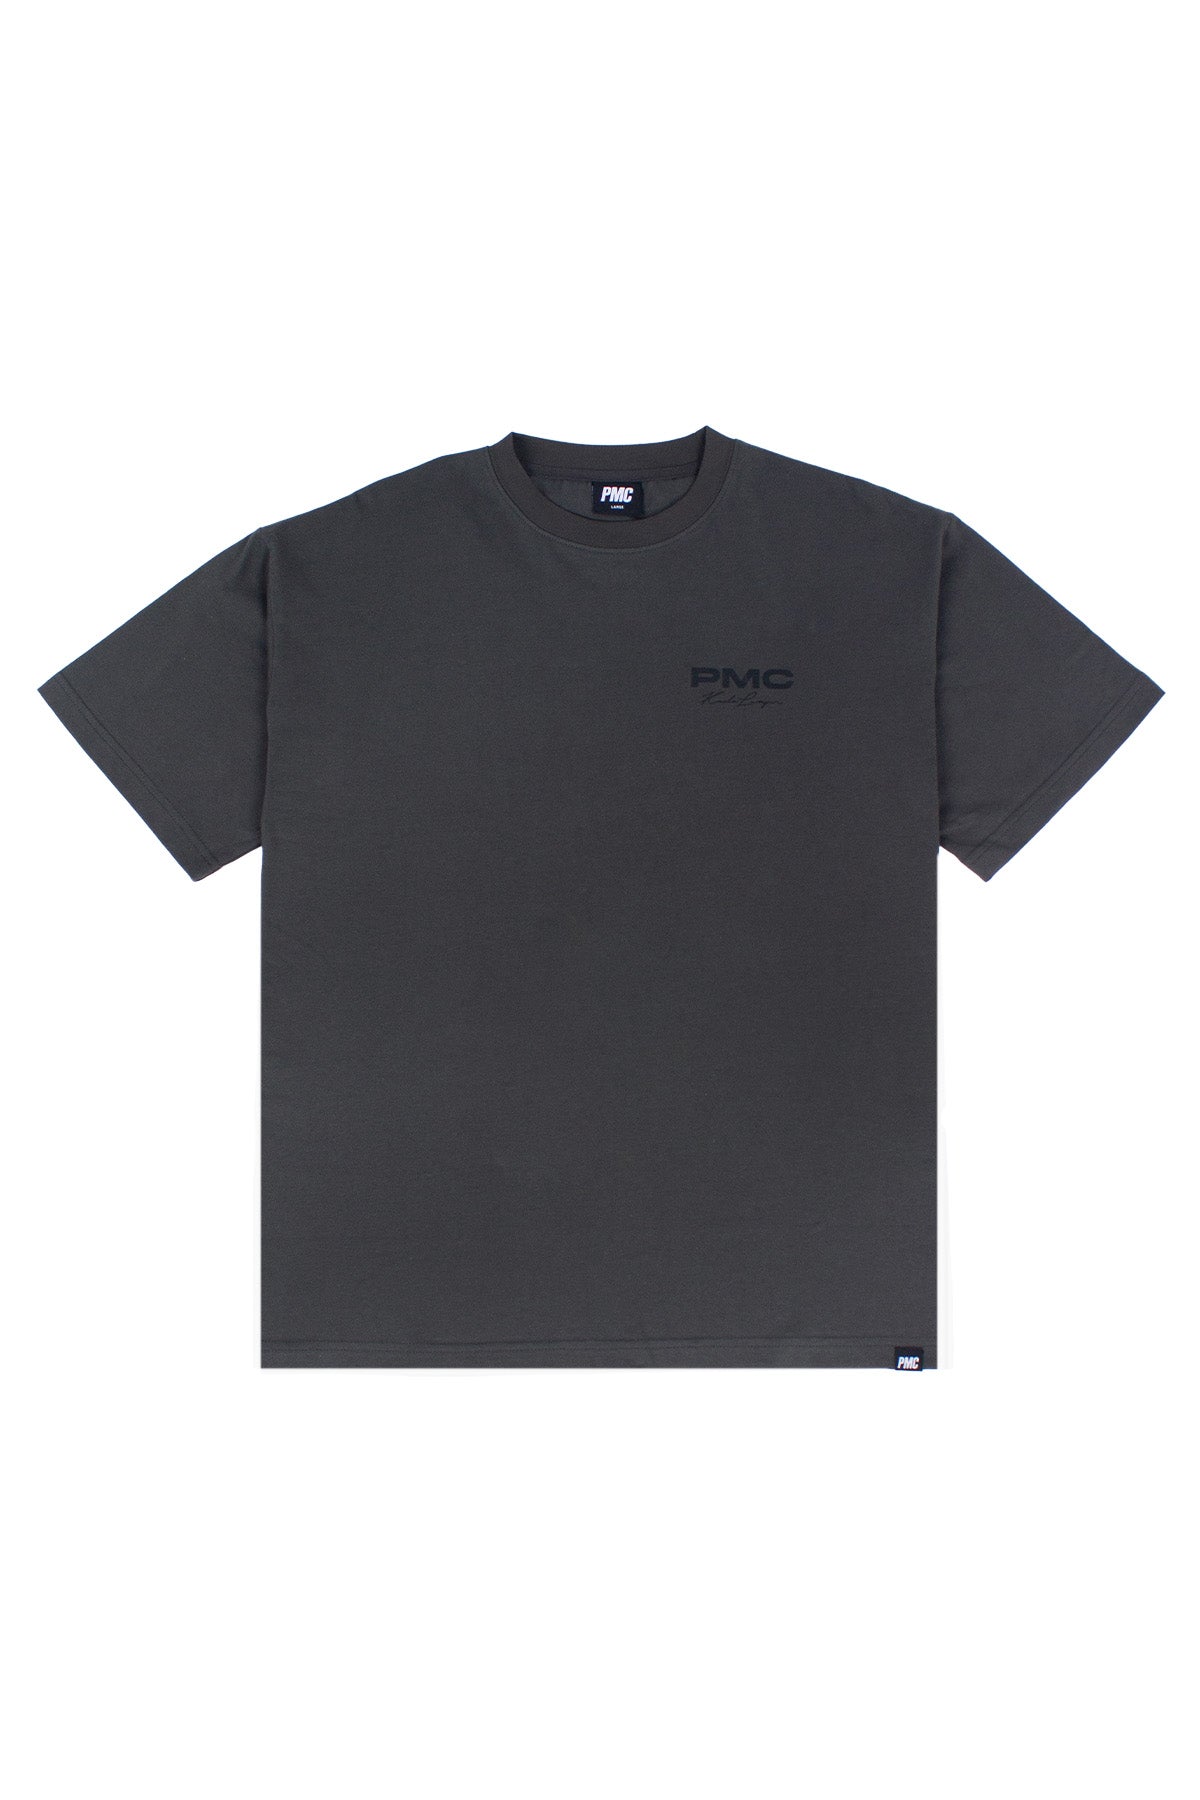 KL Scripted Oversized Tee Charcoal